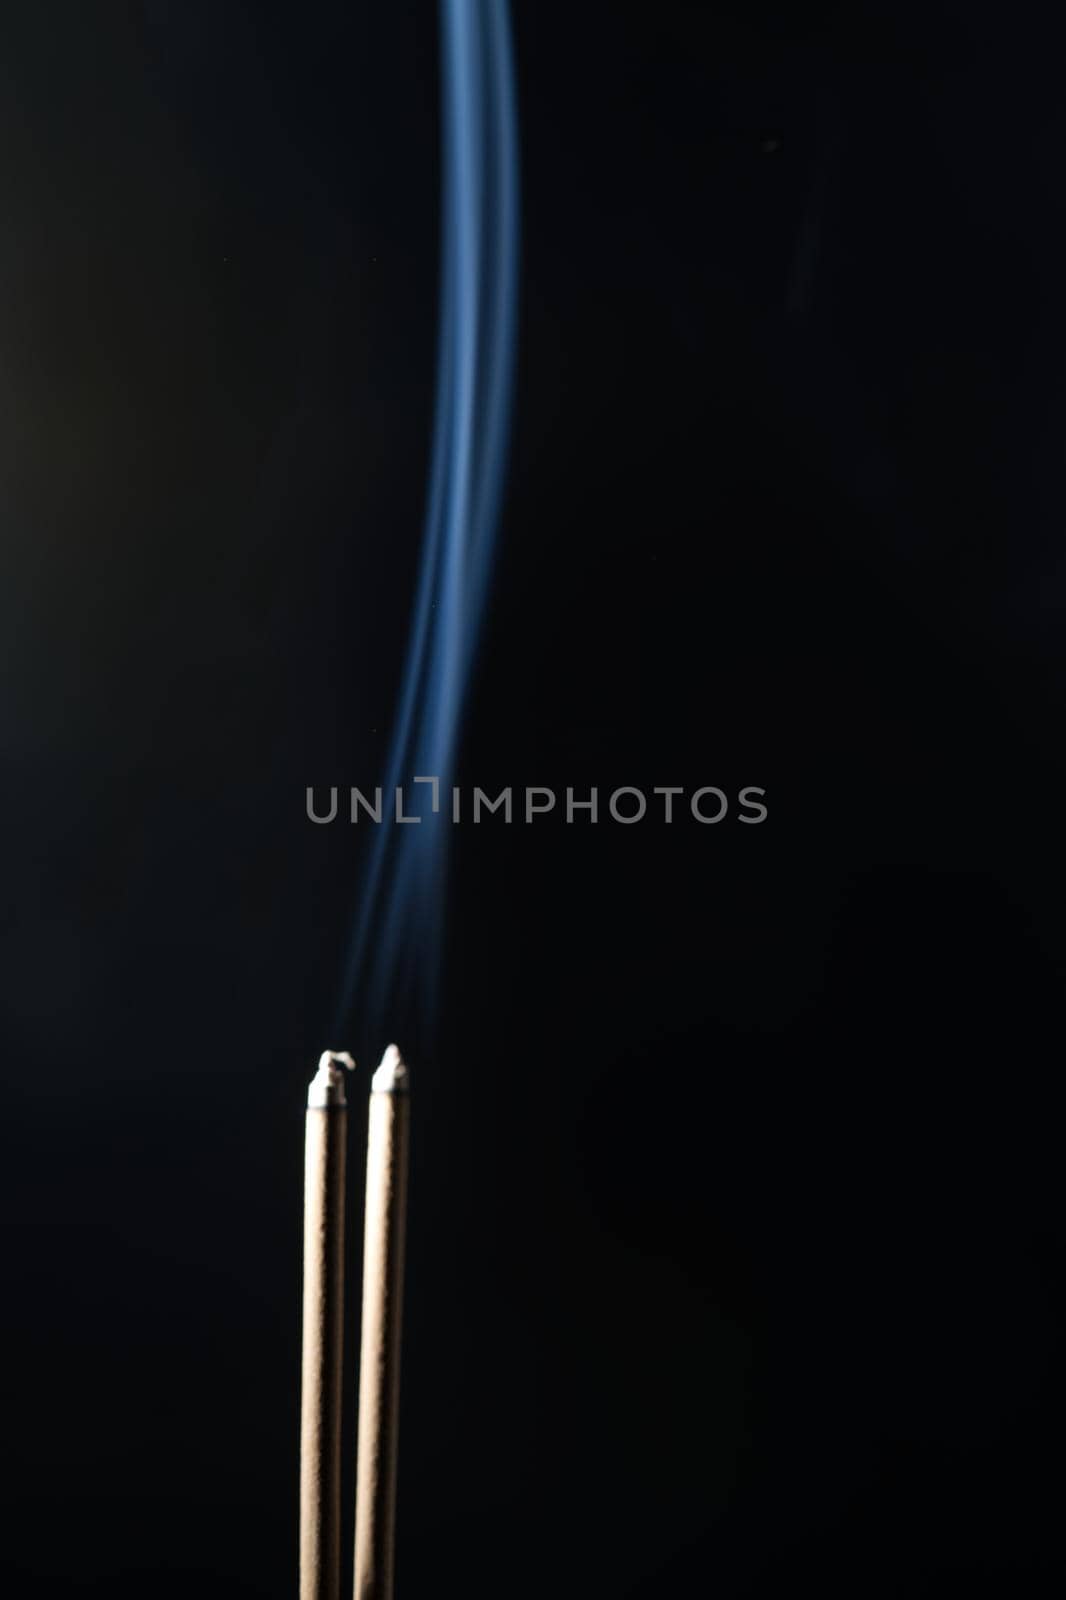 Incense burning incense, white smoke, black background, used as background image Paying homage to the sacred objects of the people of Buddhism according to their beliefs and beliefs. by noppha80